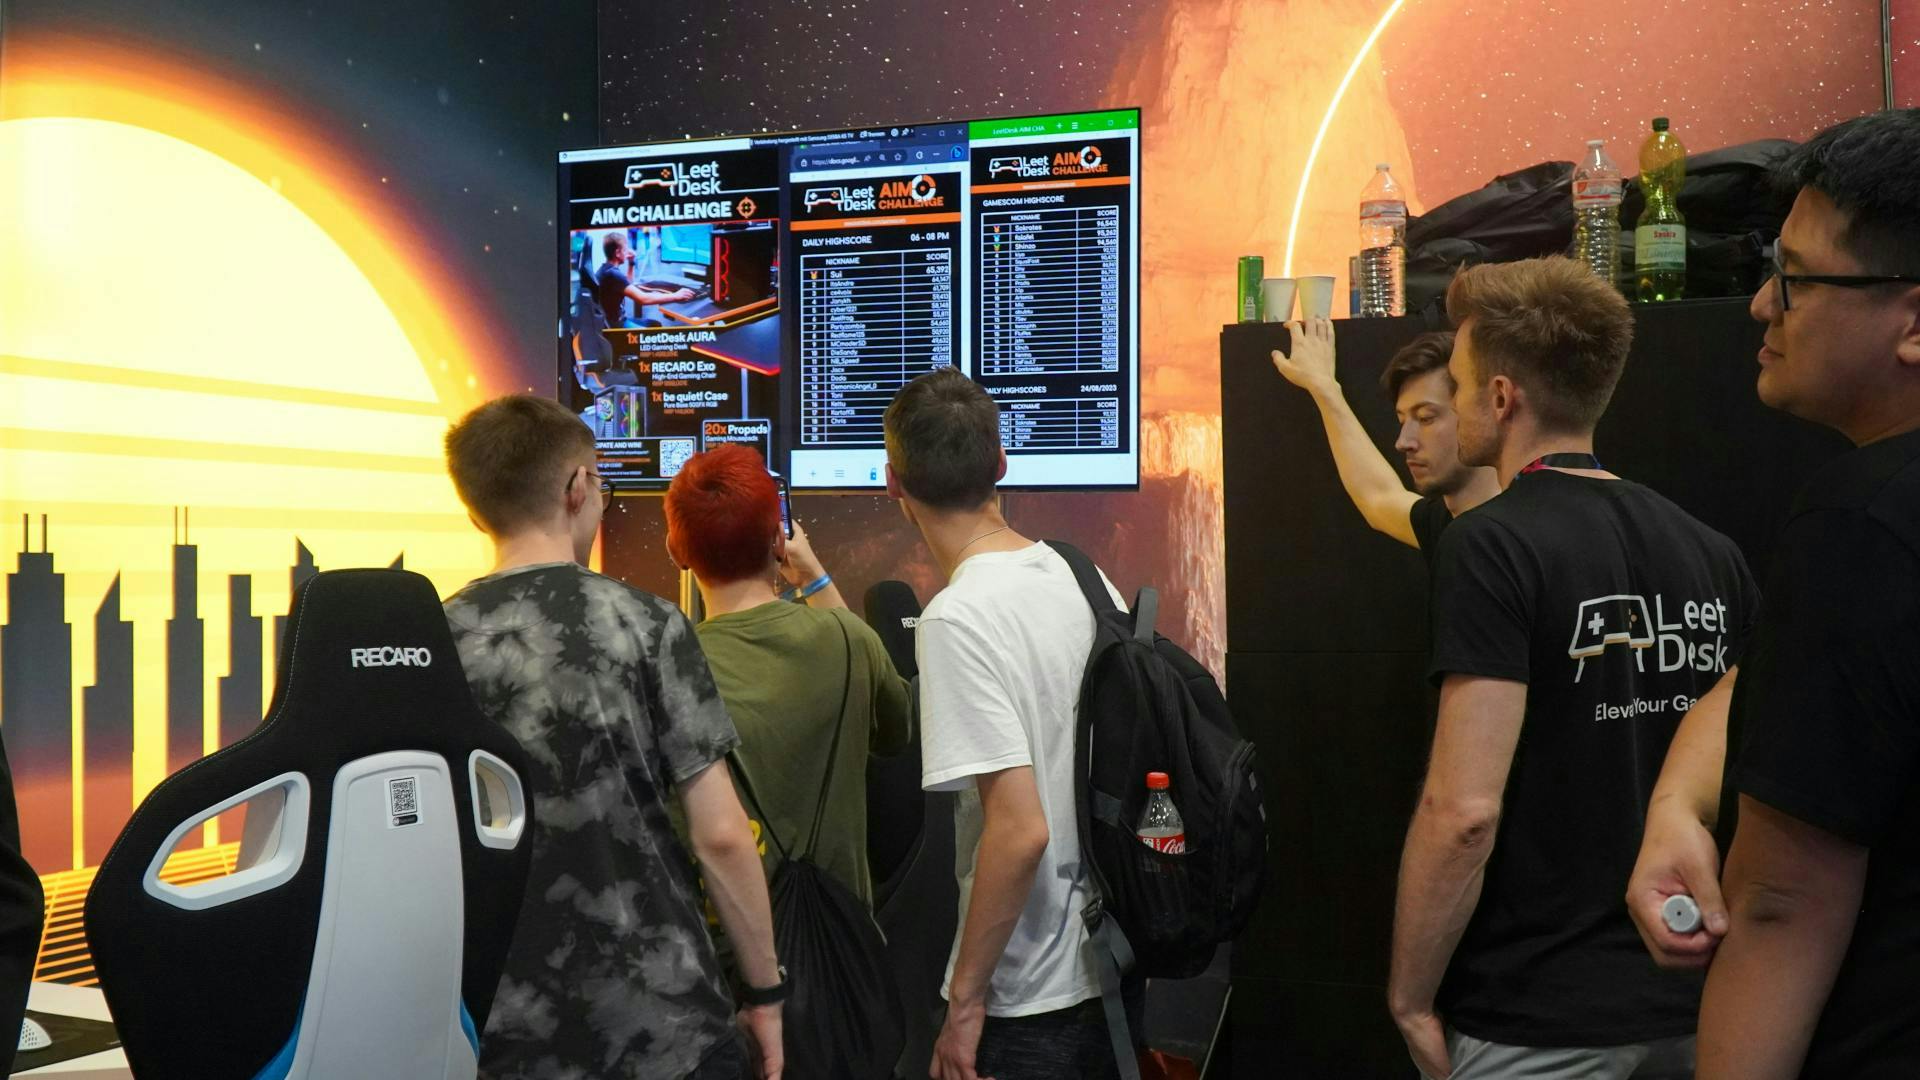 Gamescom visitors ceck out the Aim Challenge scores on the board